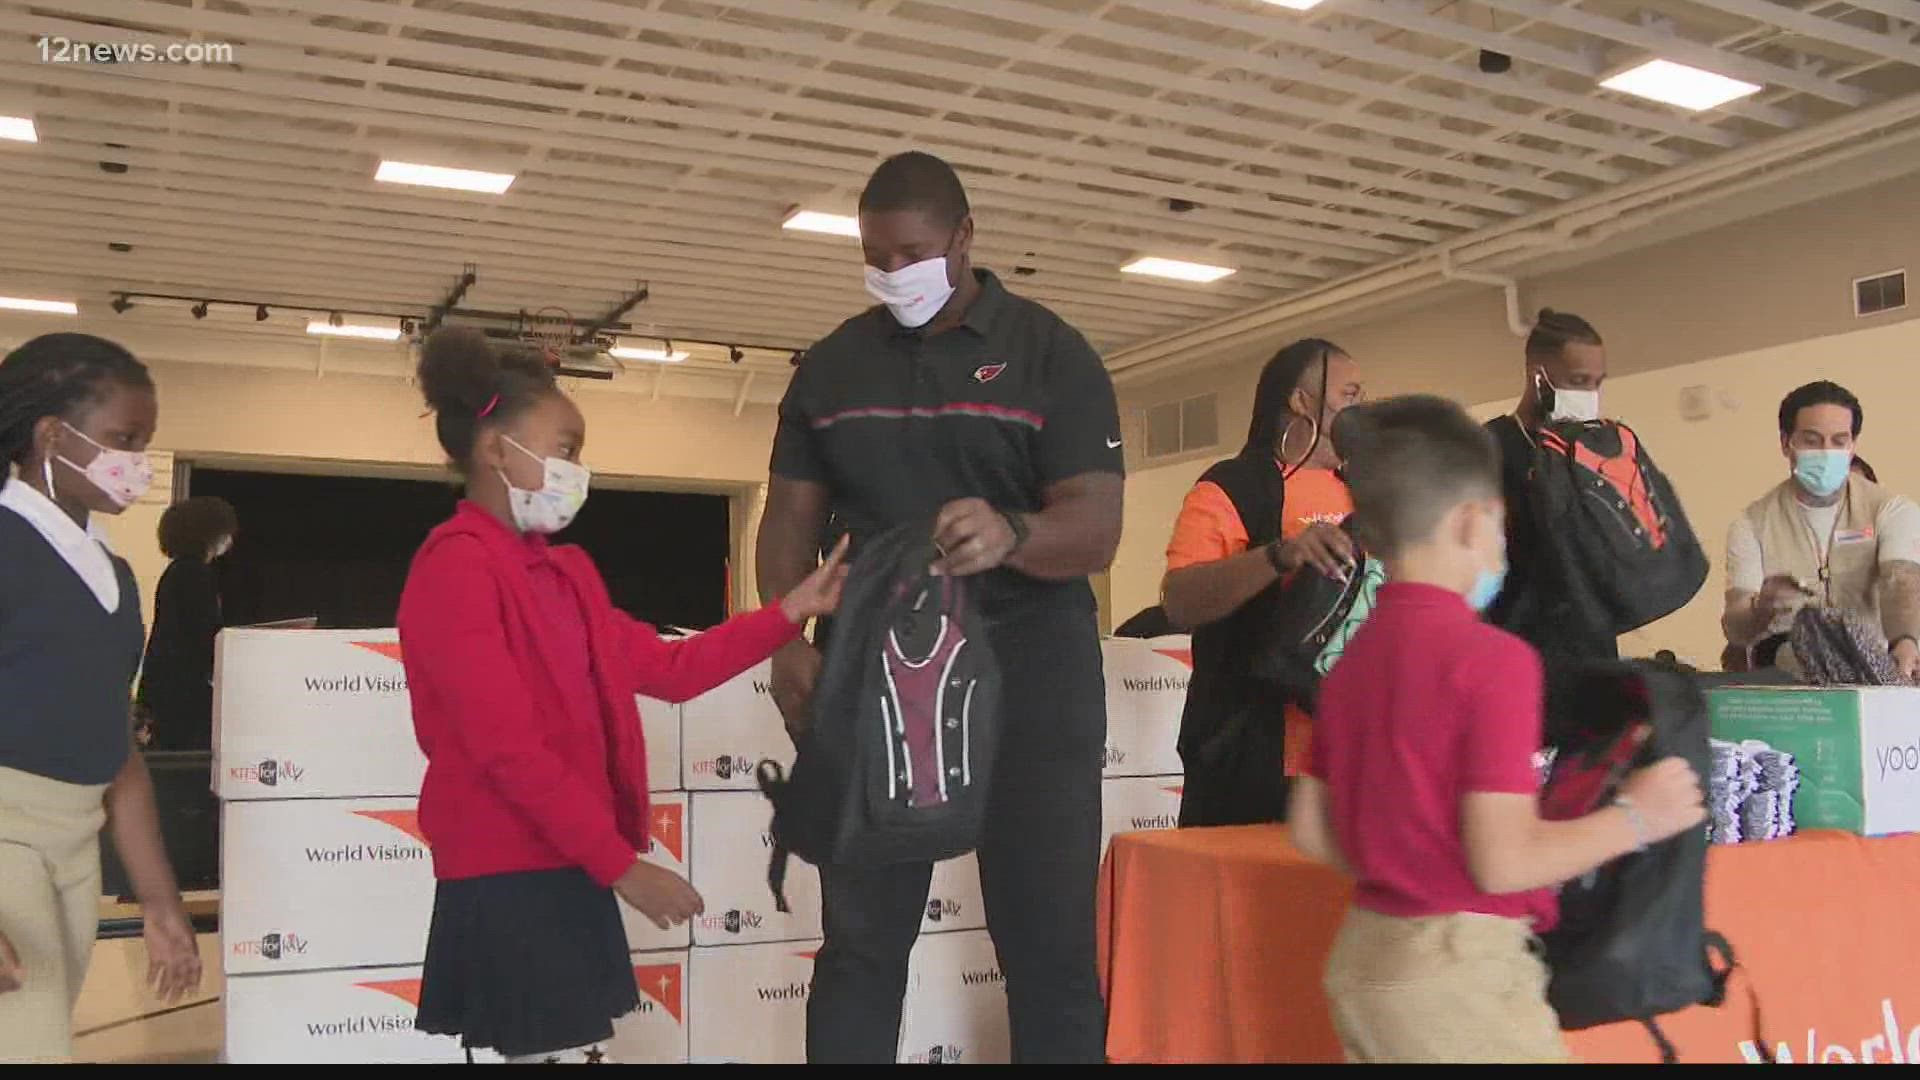 Kelvin Beachum showed up at Sun Valley Academy in Phoenix to surprise over 500 students with backpacks filled with school supplies.